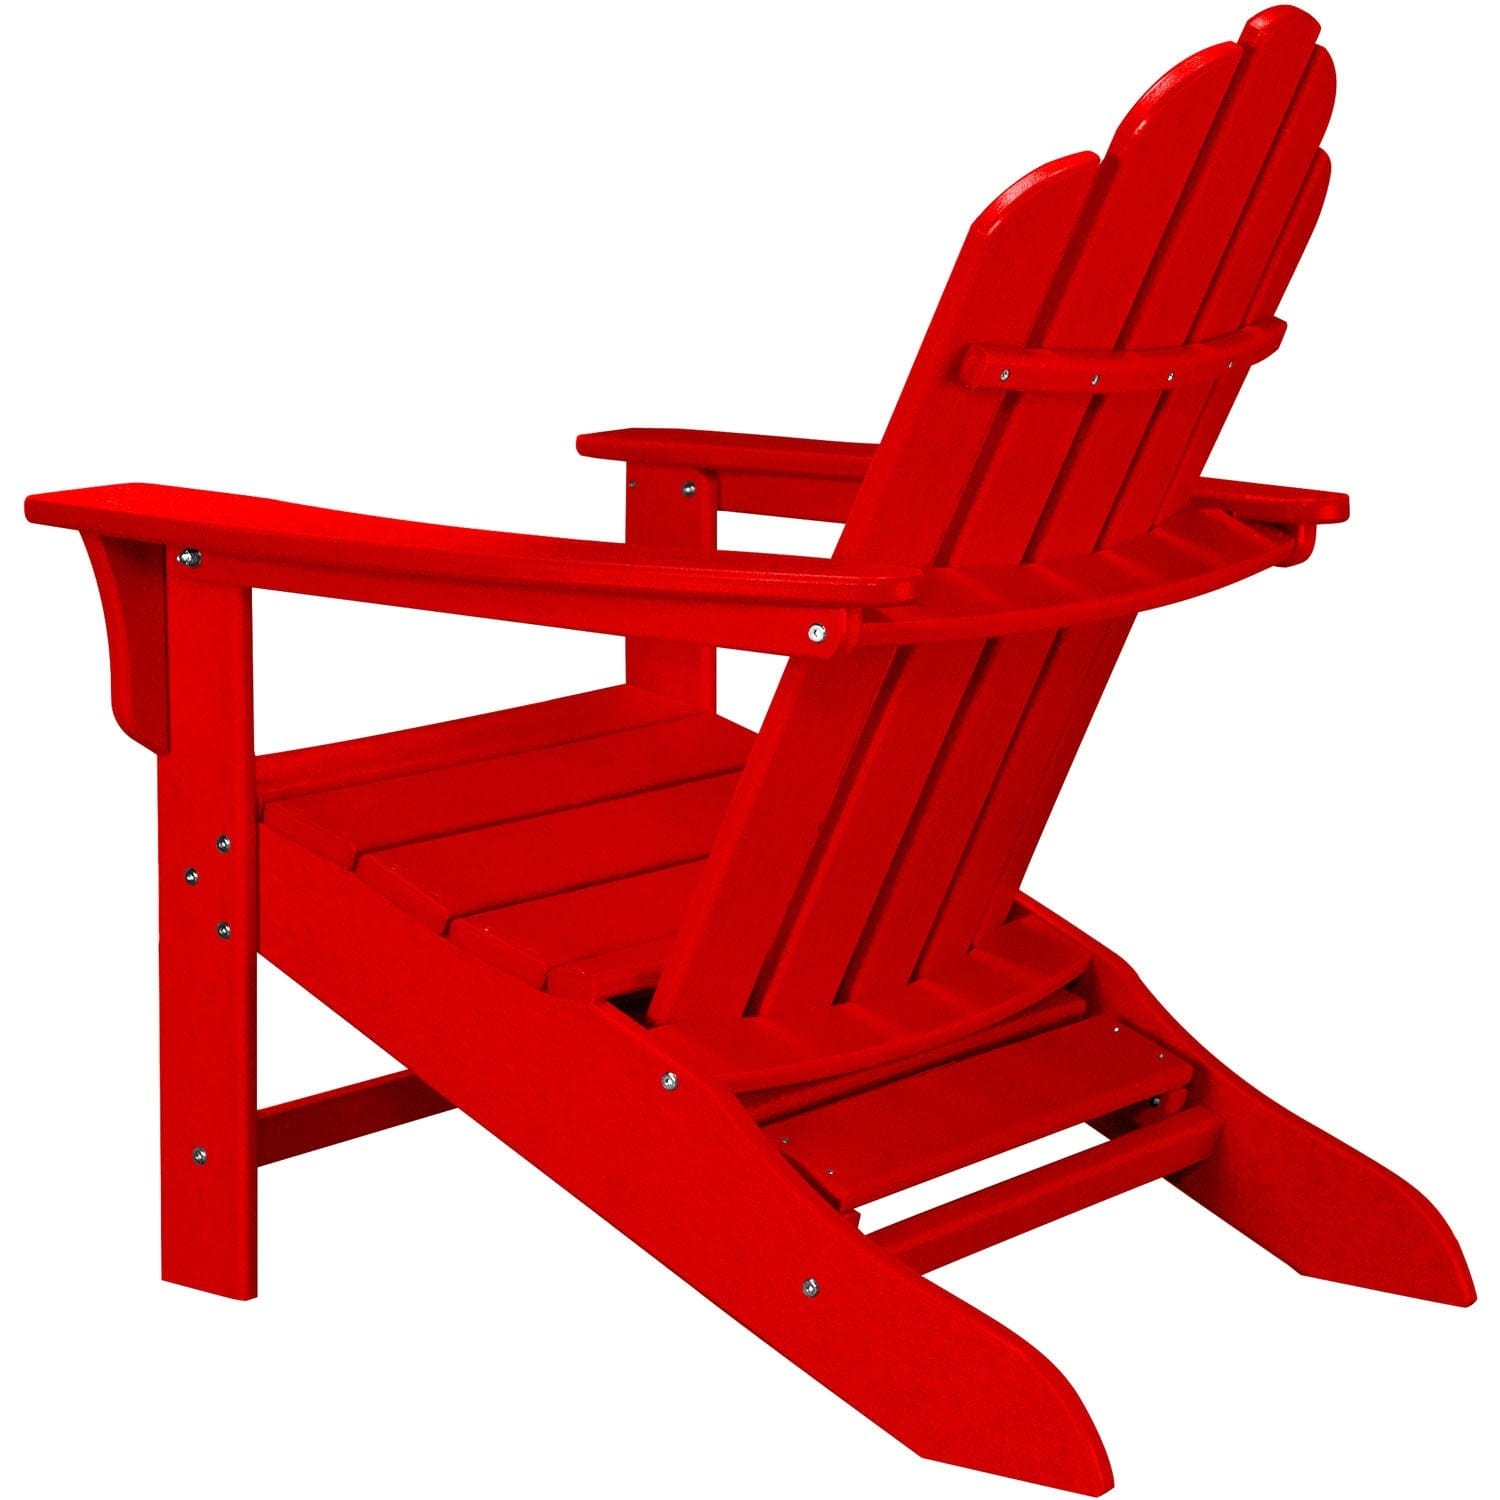 Hanover Adirondack Chair Hanover- All Weather Contoured Adirondack Chair with Hideaway Ottoman- Sunset Red | HVLNA15SR